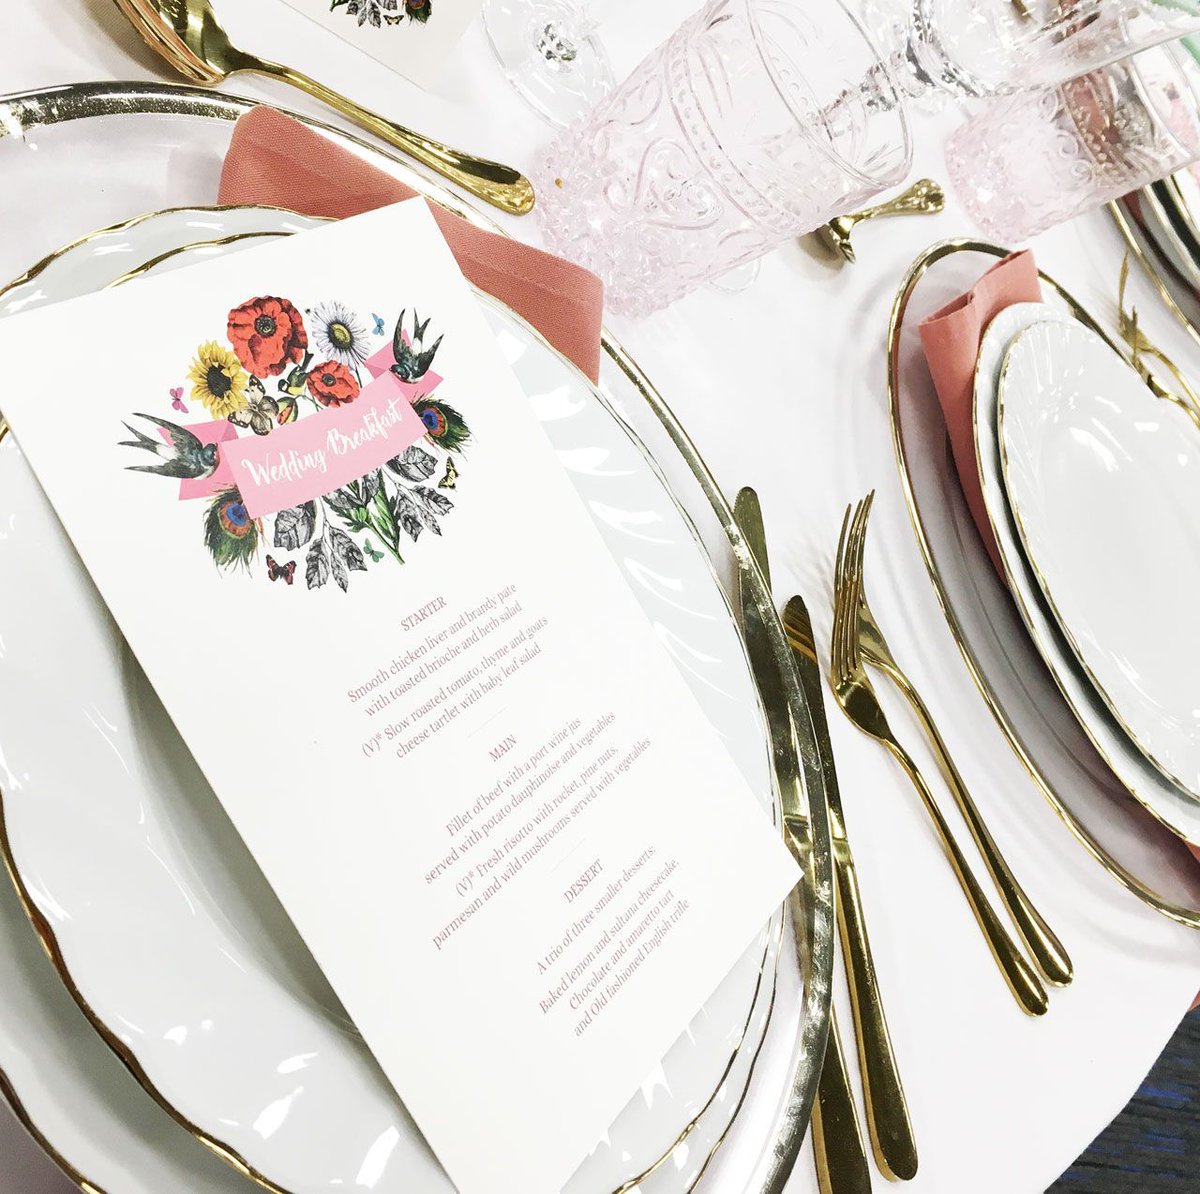 Rose blush and gold, one of our most popular combinations of 2019! Love the Dusky Pink Vintage Style water glasses here and that stationery by @lovestruck_stationery is just beautiful!! #hirethelot #roseblushwedding #pinkandgoldwedding #goldcutlery #weddinghire